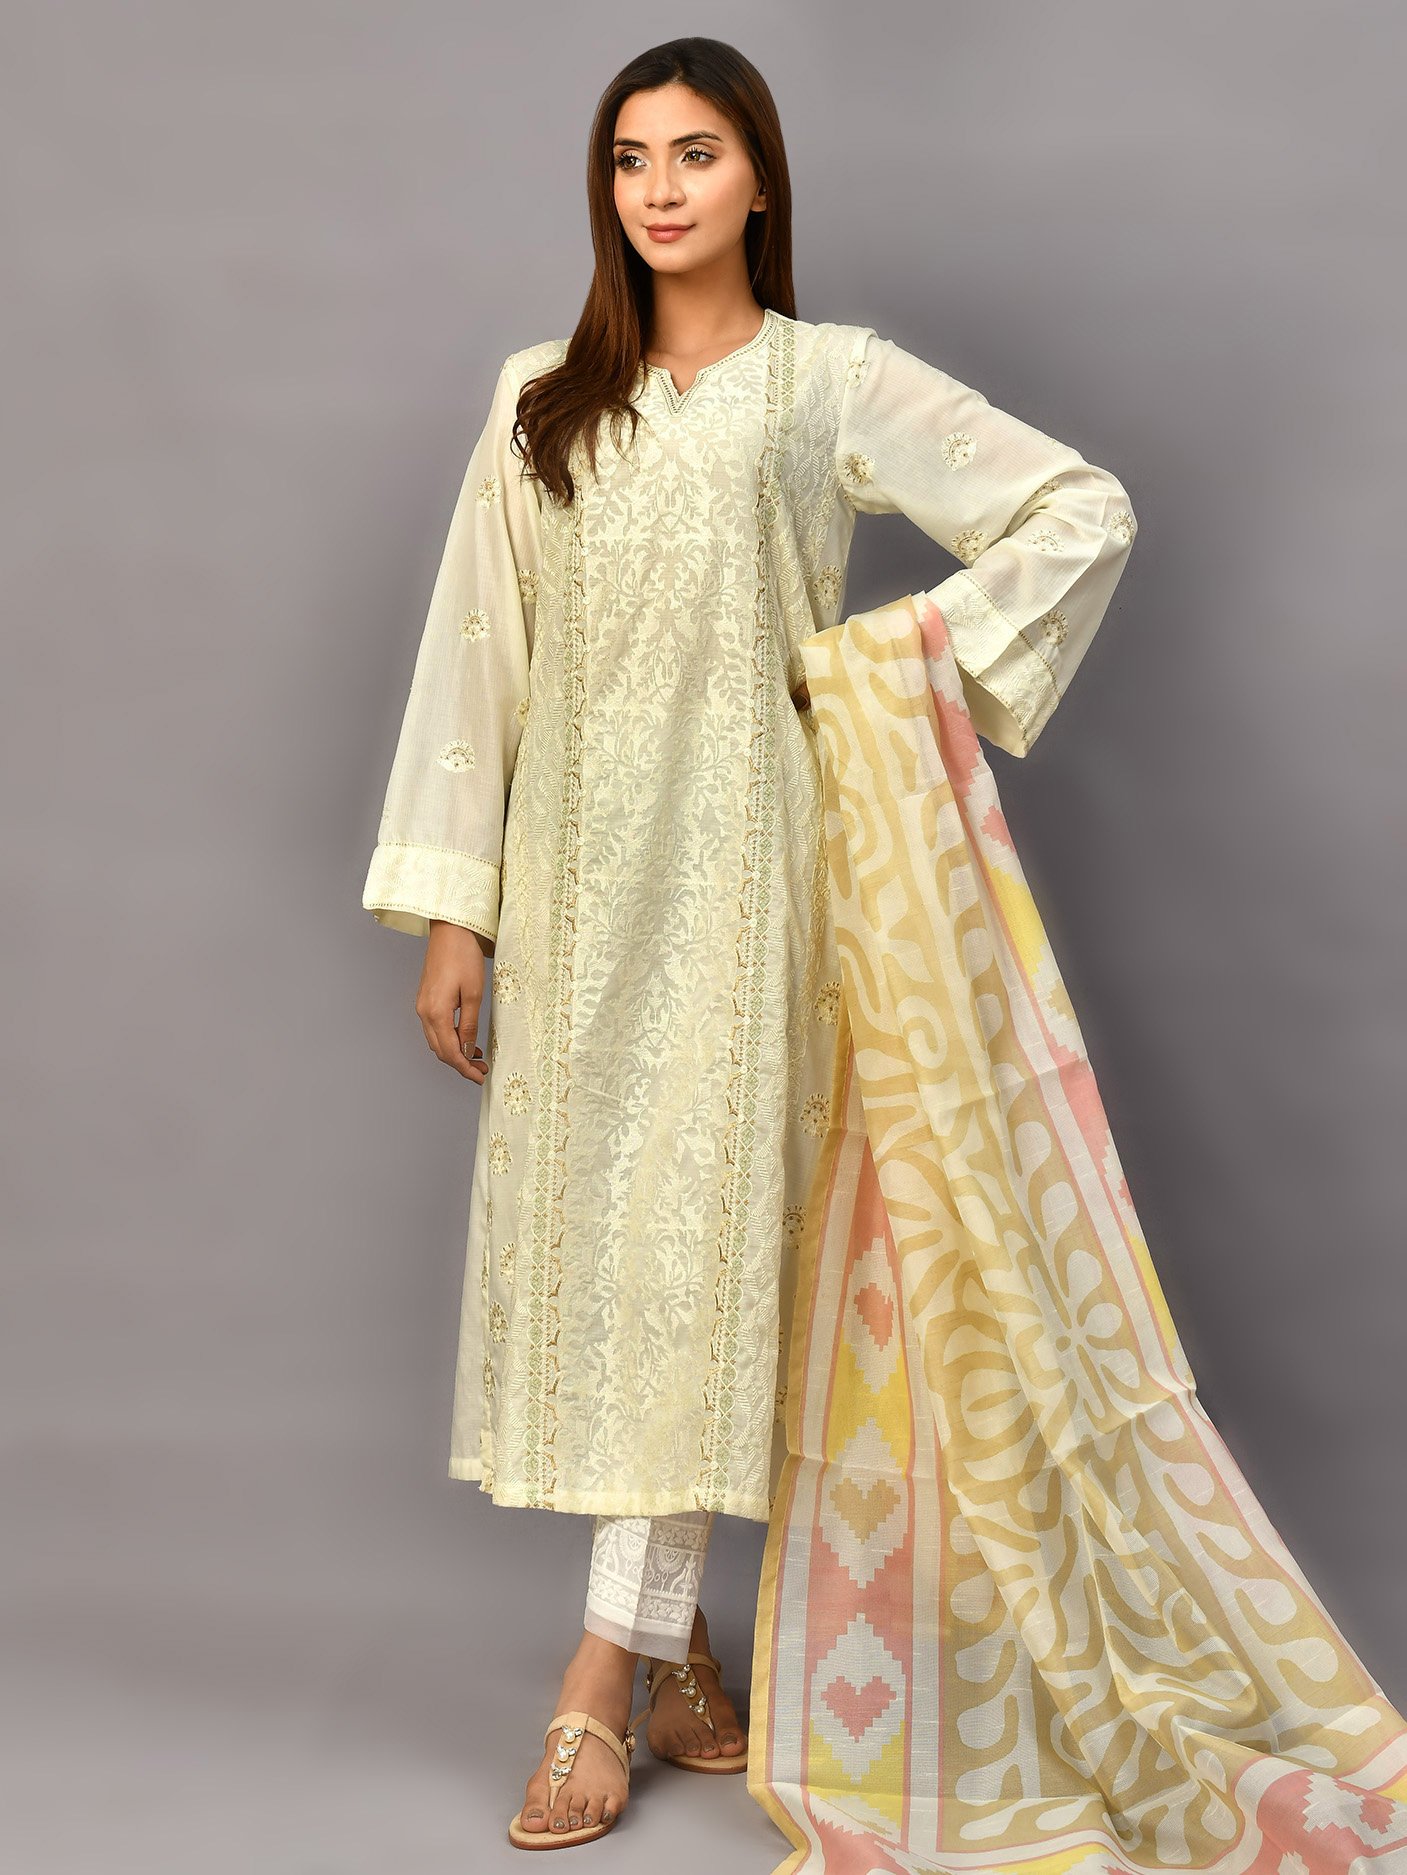 Beautiful EMBROIDERED TEXTURED LAWN 2PC SUIT